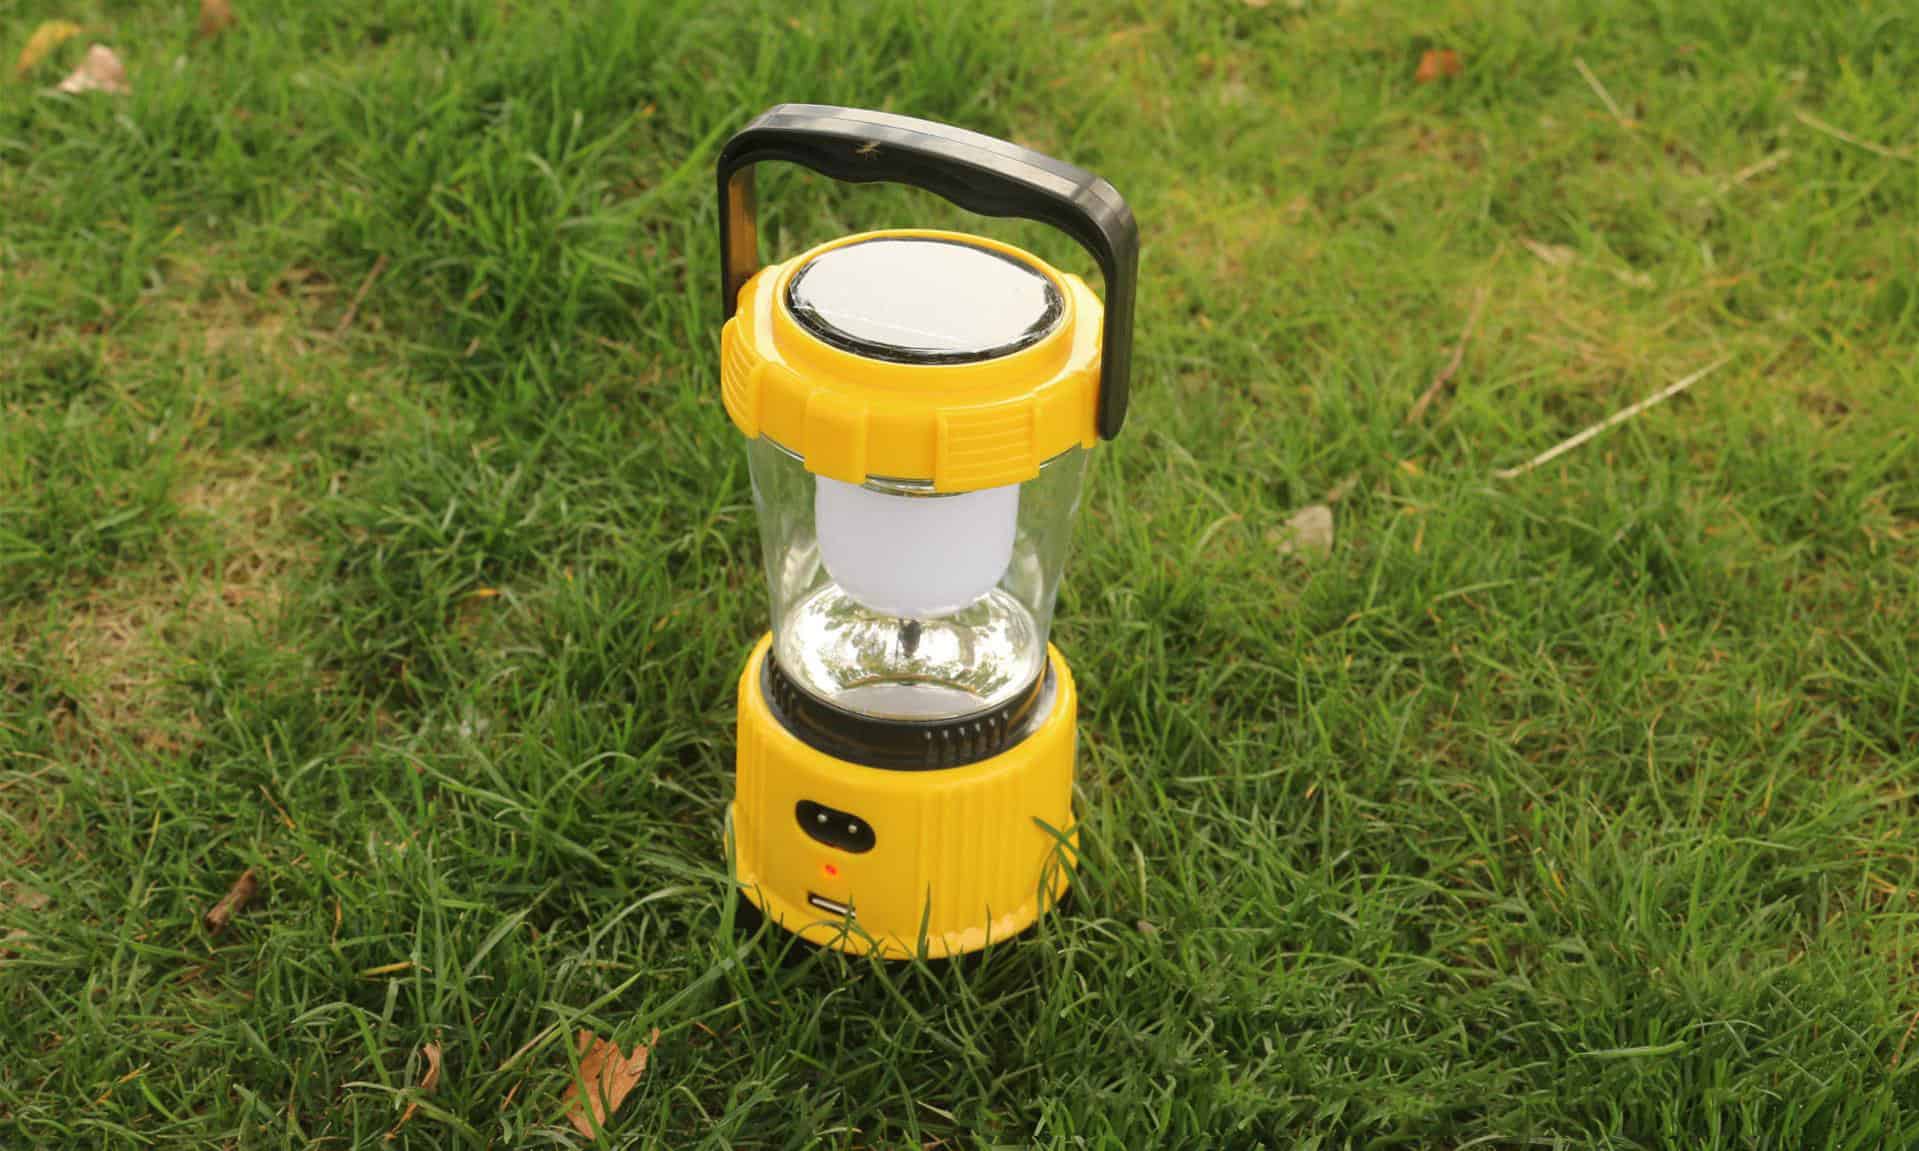 10 Best Solar Camping Lanterns 2022 - Reviews and Buyer’s Guide